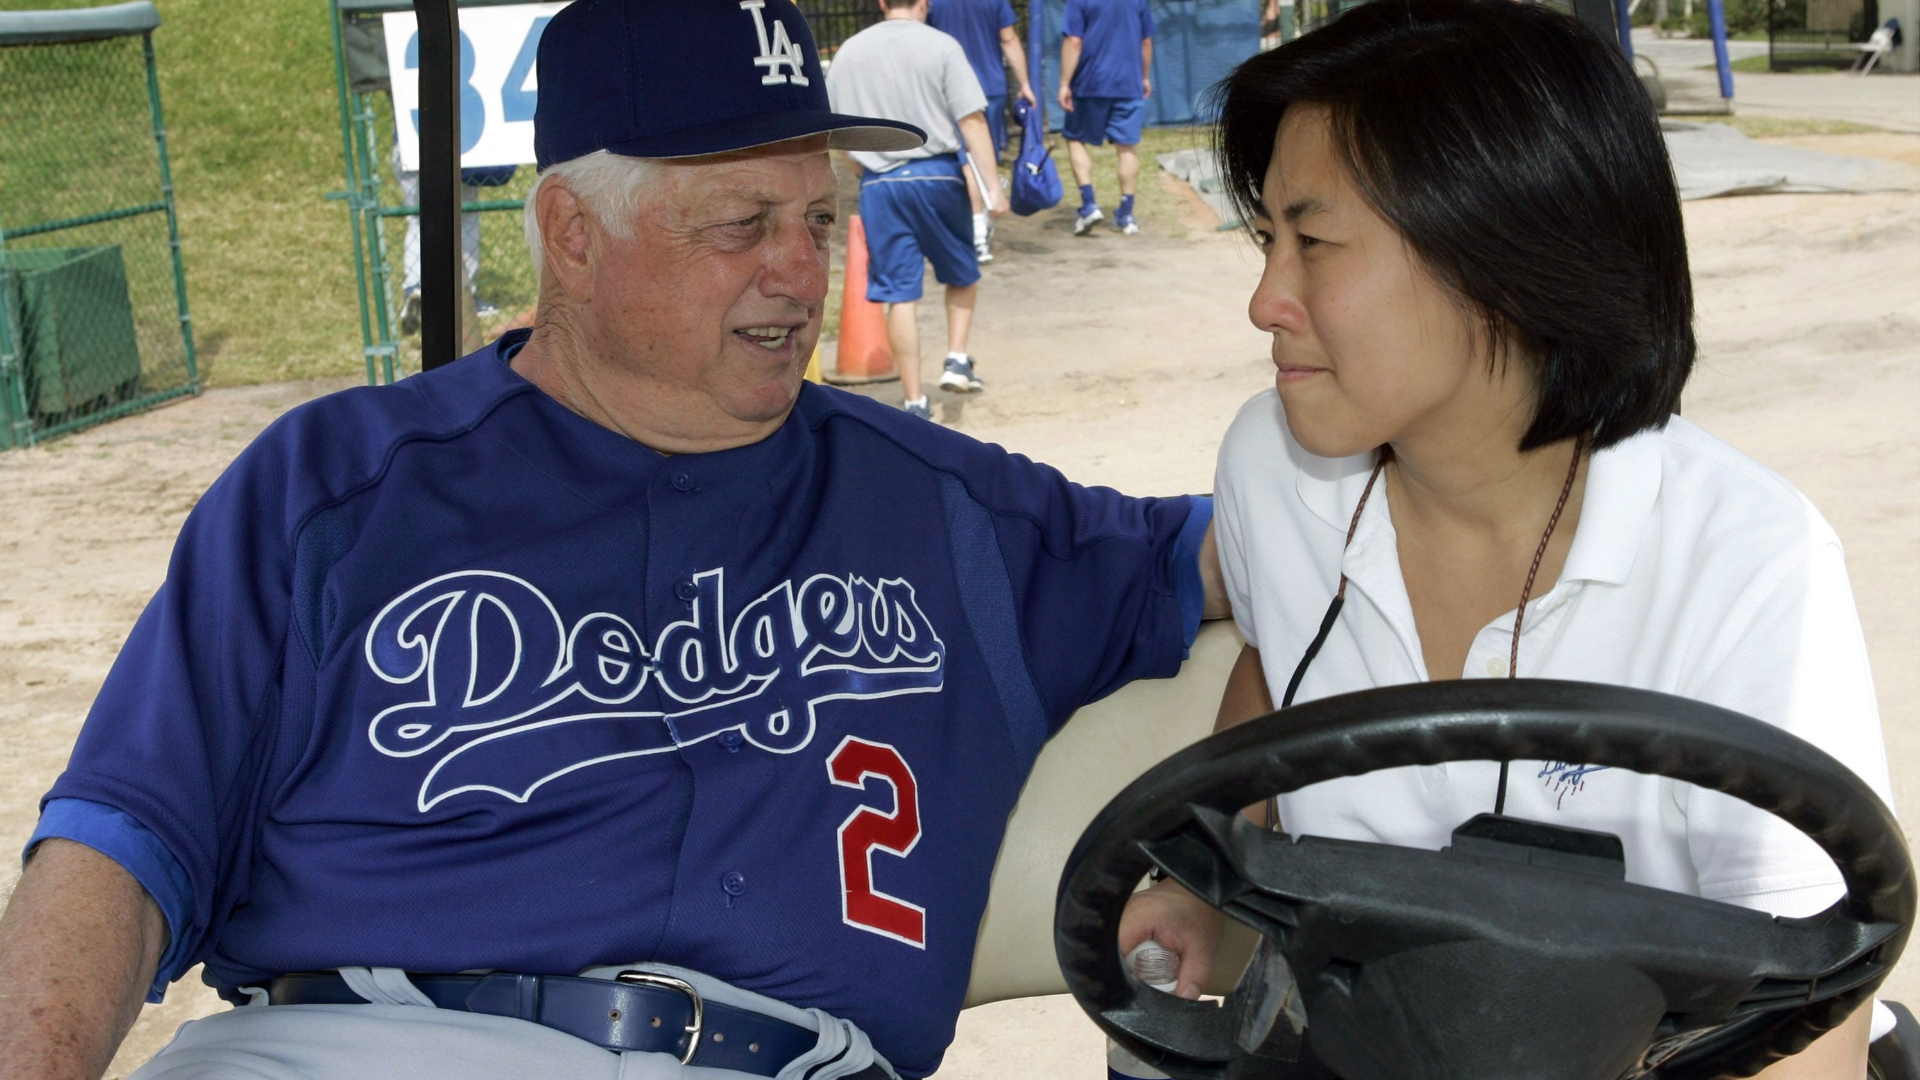 Lasorda, fiery Hall of Fame Dodgers manager, dies at 93, Sports